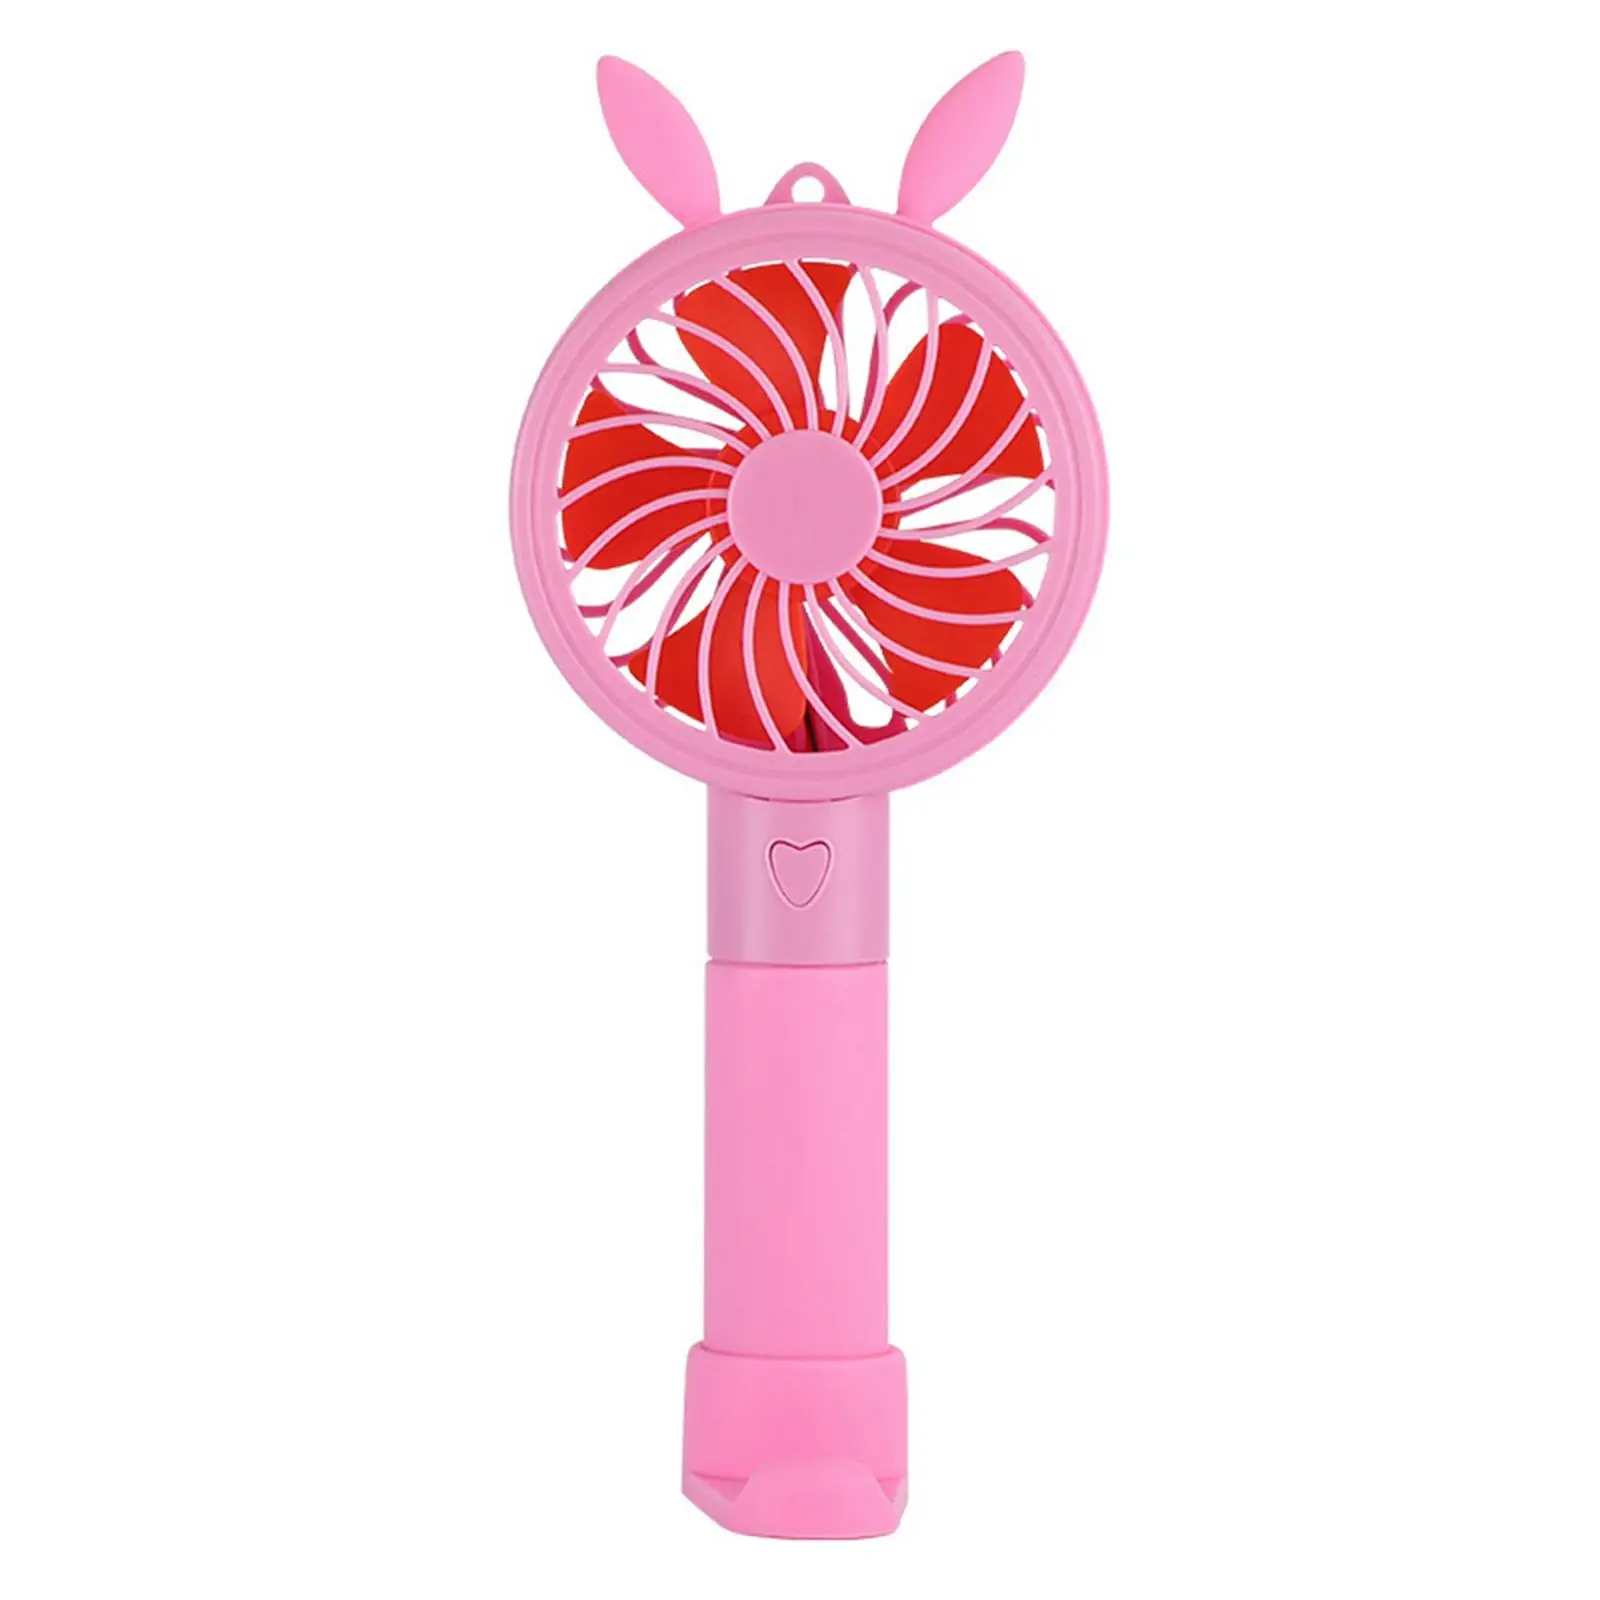 Mini Handheld Fan 3 Speed Personal Cooling Fan Makeup Eyelash Fan USB Rechargeable 6-8 Hours Operated for Home Office Travel